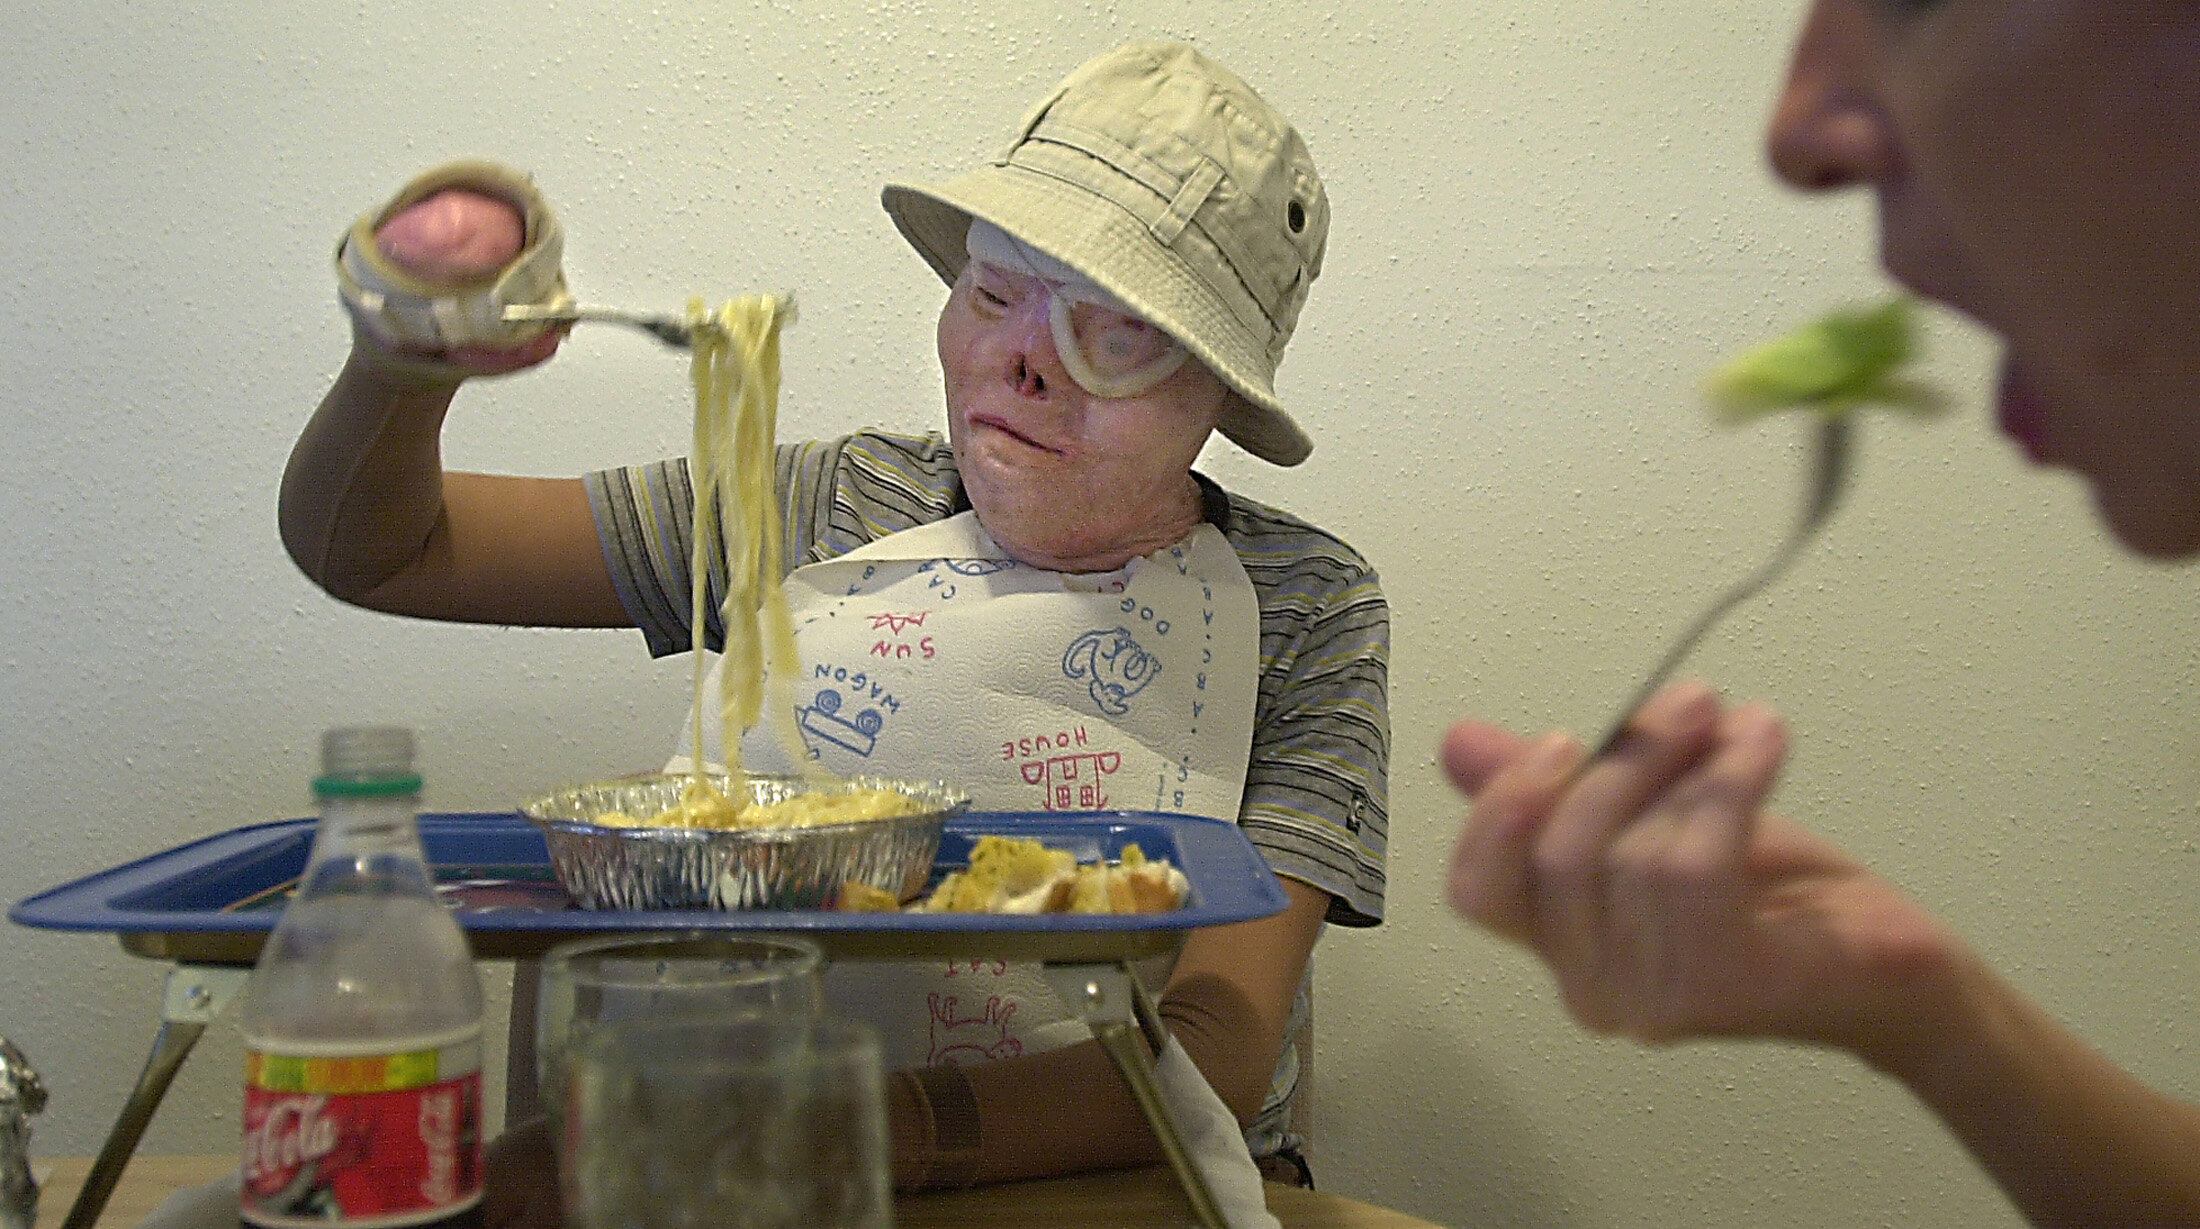  With a little help from a Velcro splint on her hand, Jacqui could serve herself fettuccine alfredo in the summer of 2001. Whenever she does something new, her father cheers. 'Look, you're eating by yourself,' Amadeo exclaimed one day as he dabbed ma